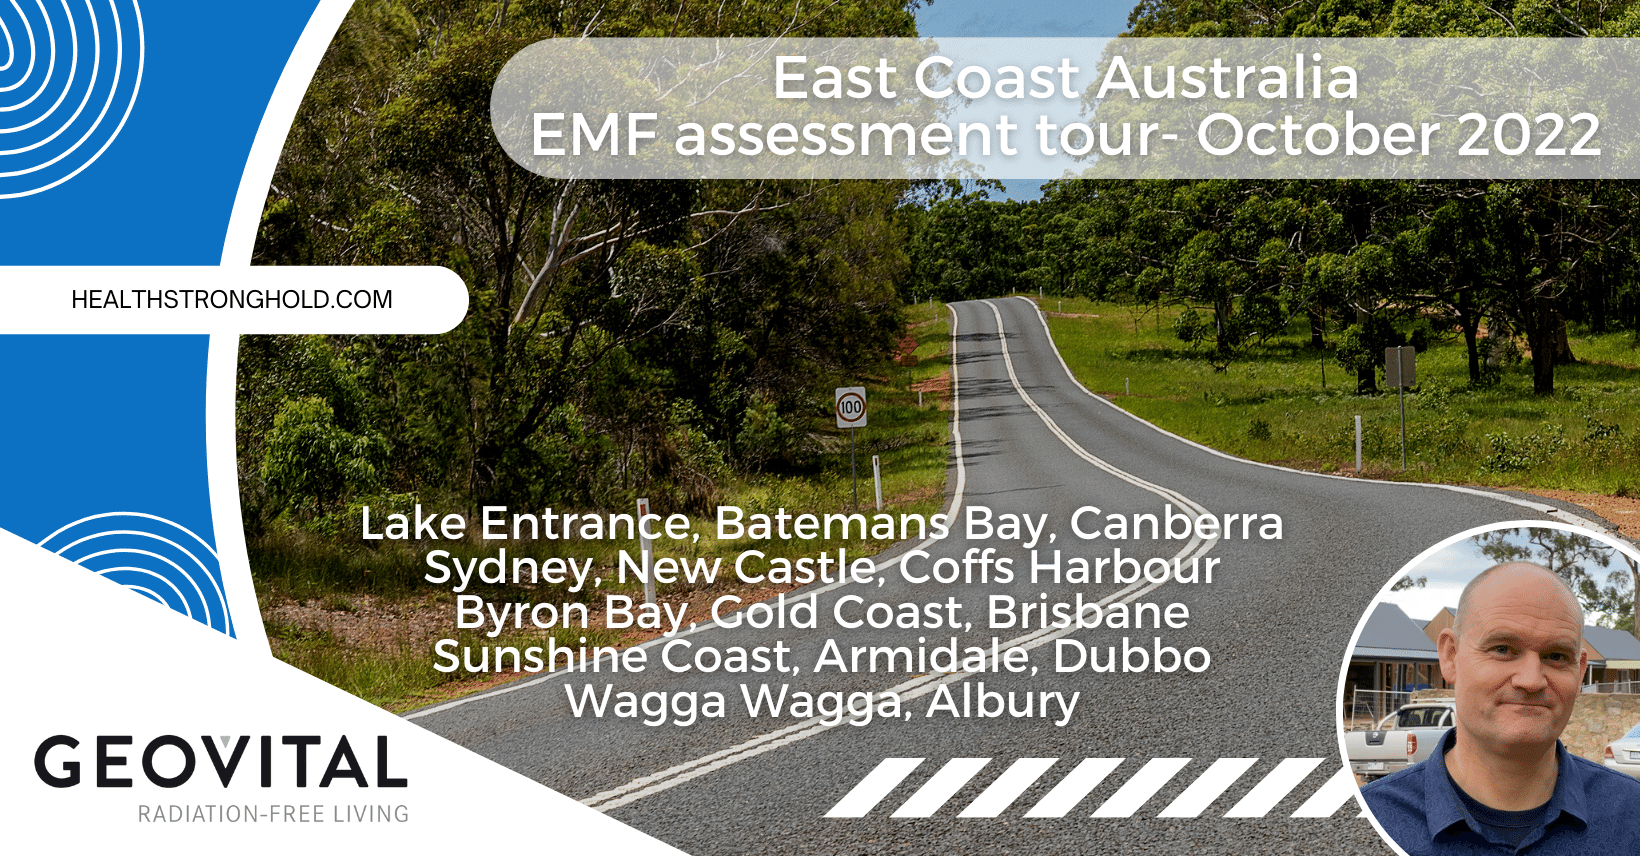 GEOVITAL EMF Radiation home assessments by Patrick van der Burght are available on his East Coast Australia tour